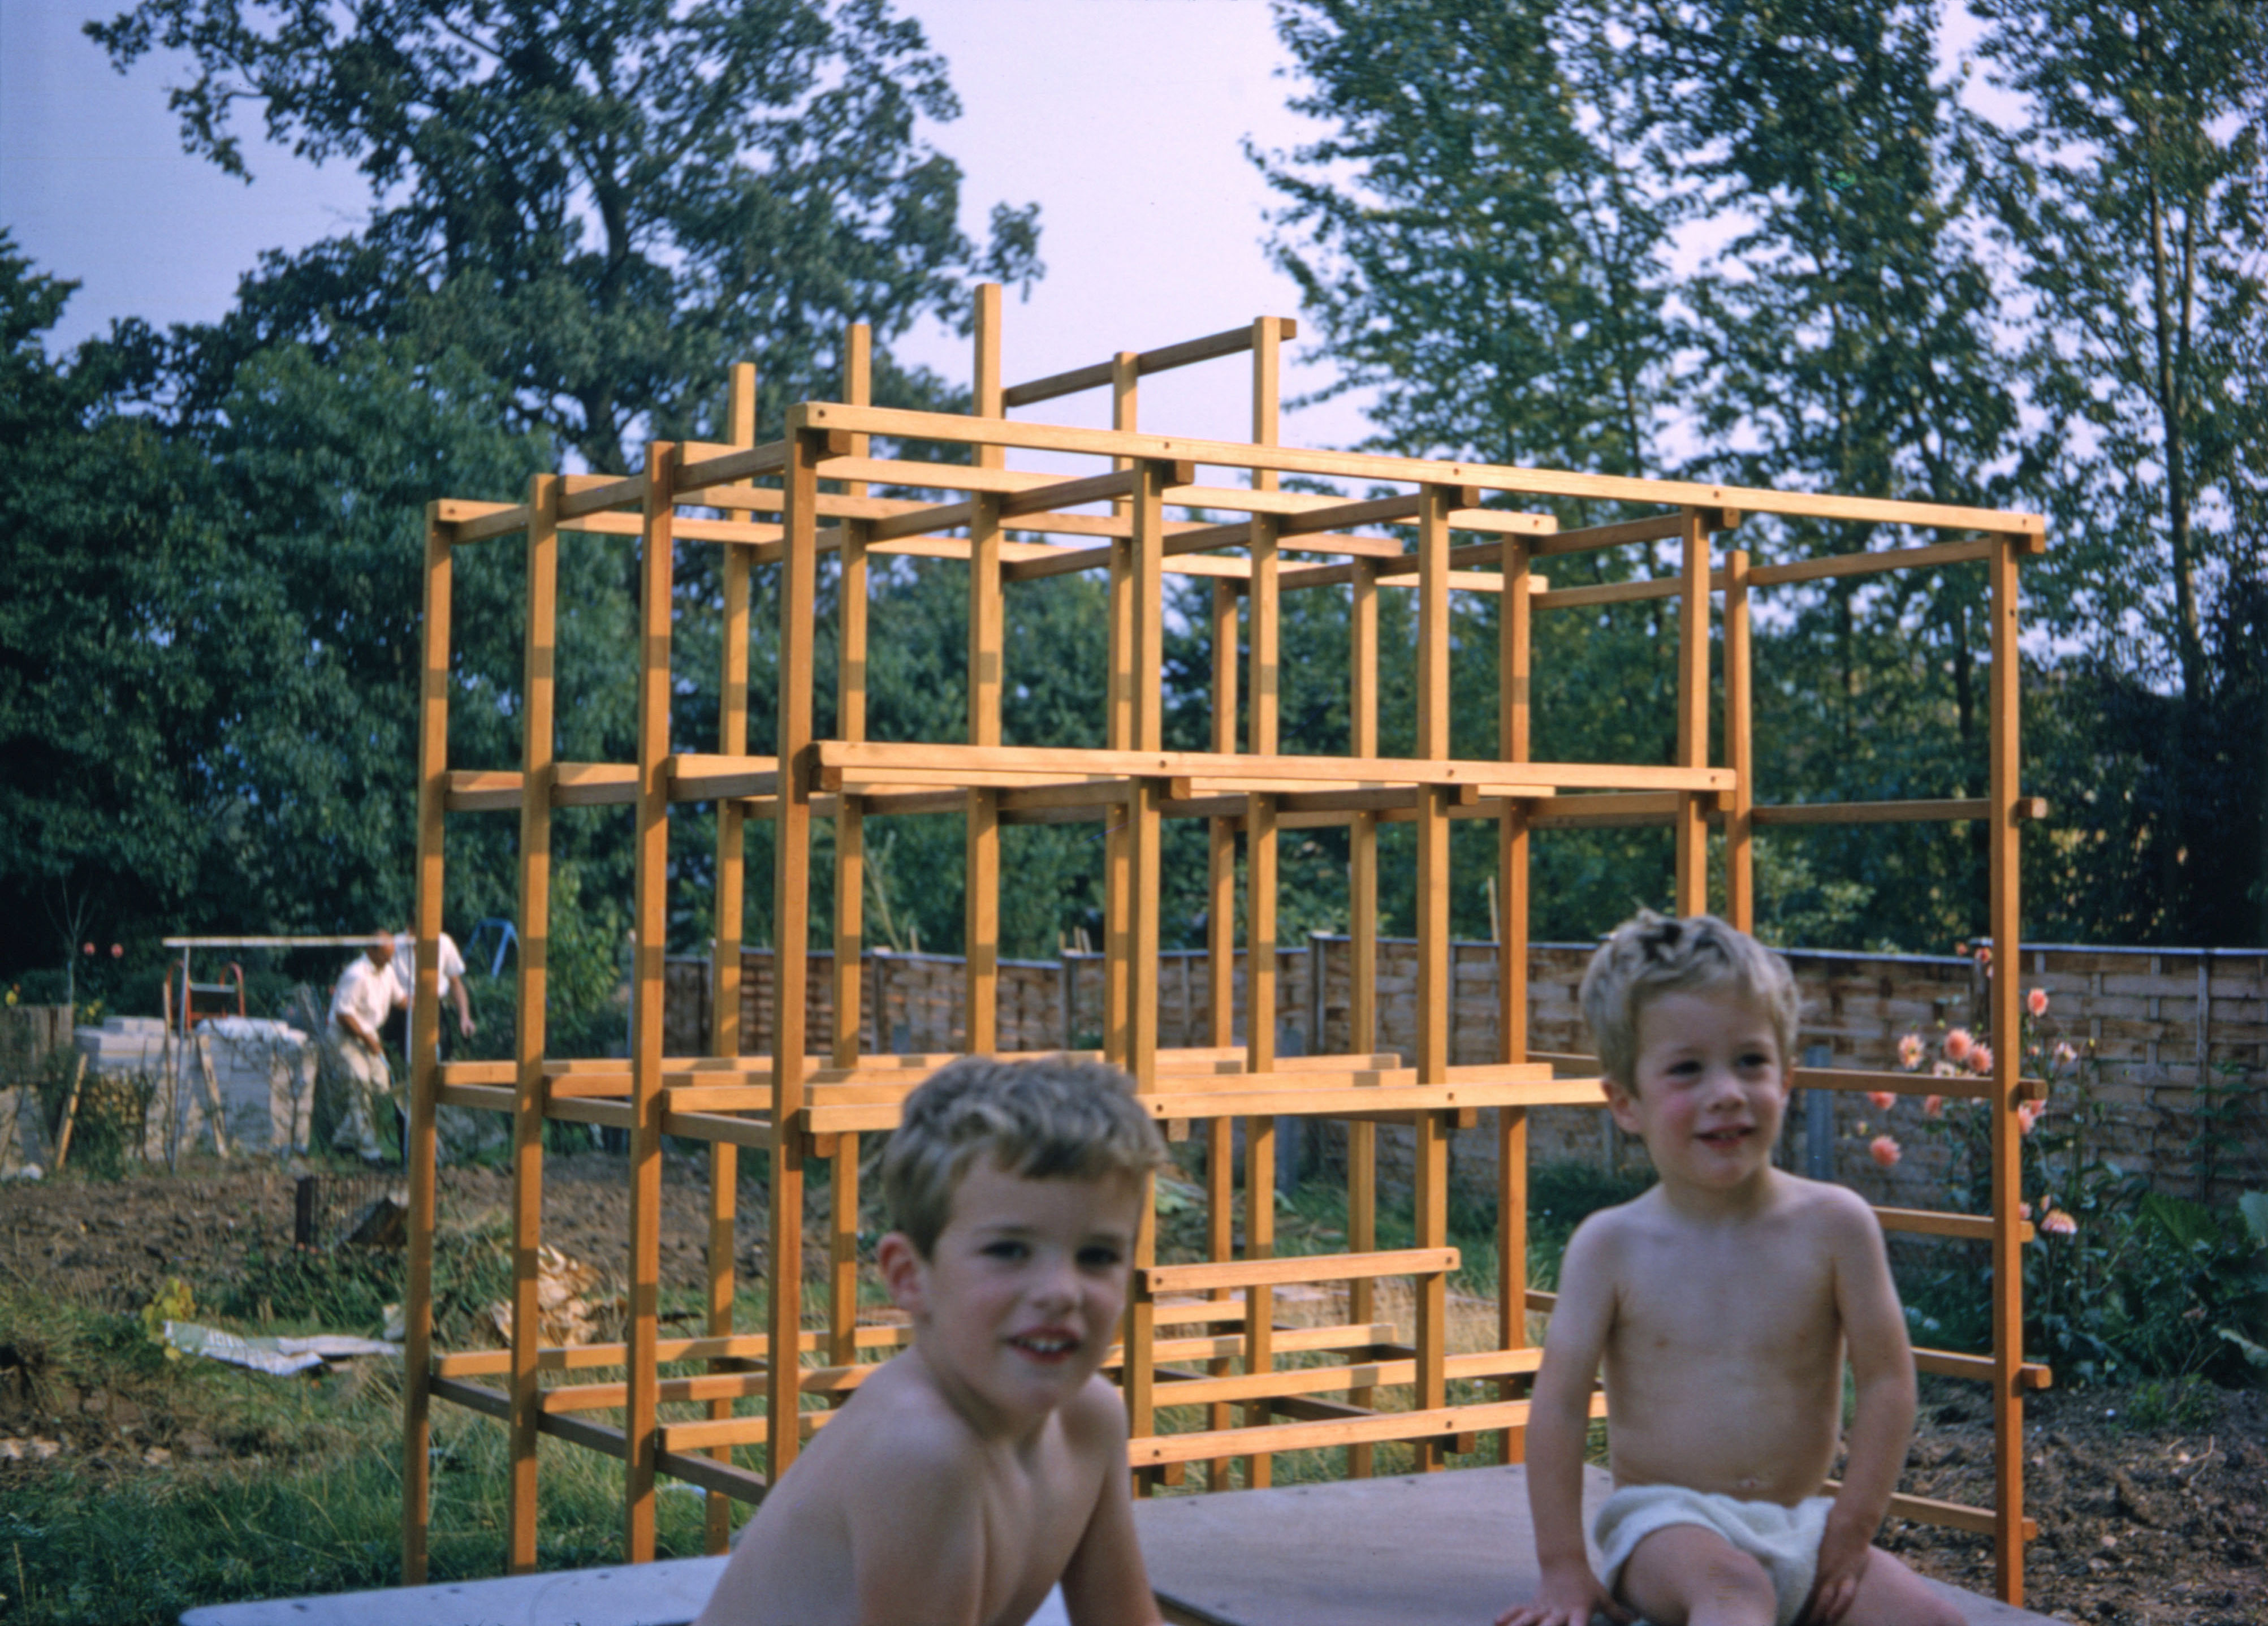 Summer 1967 The climbing frame that Phil built for the boys at Bracknell.